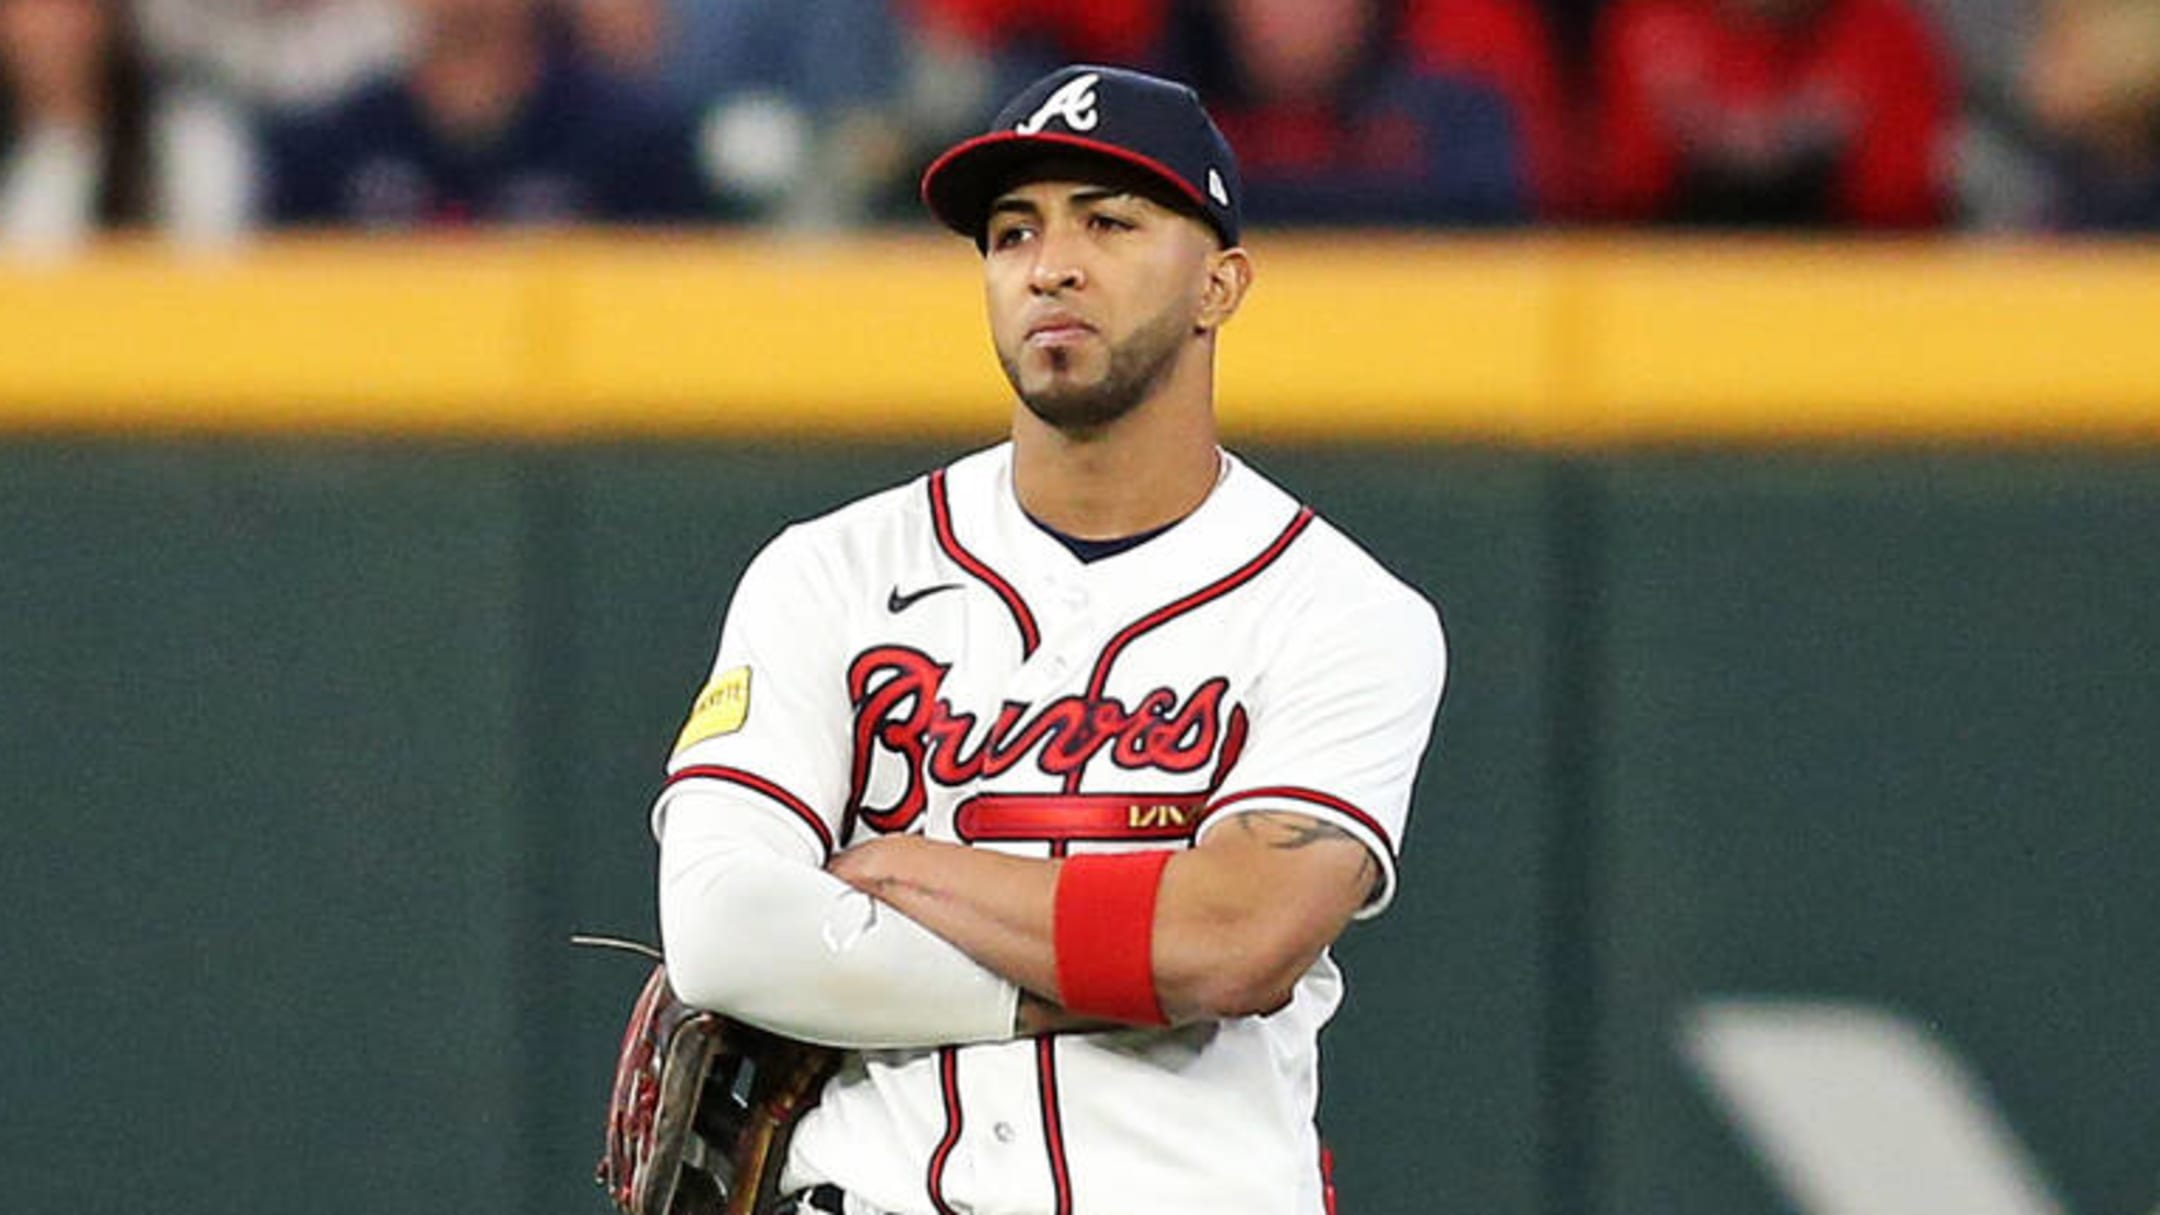 Braves fans throw cans on field after catcher interference call